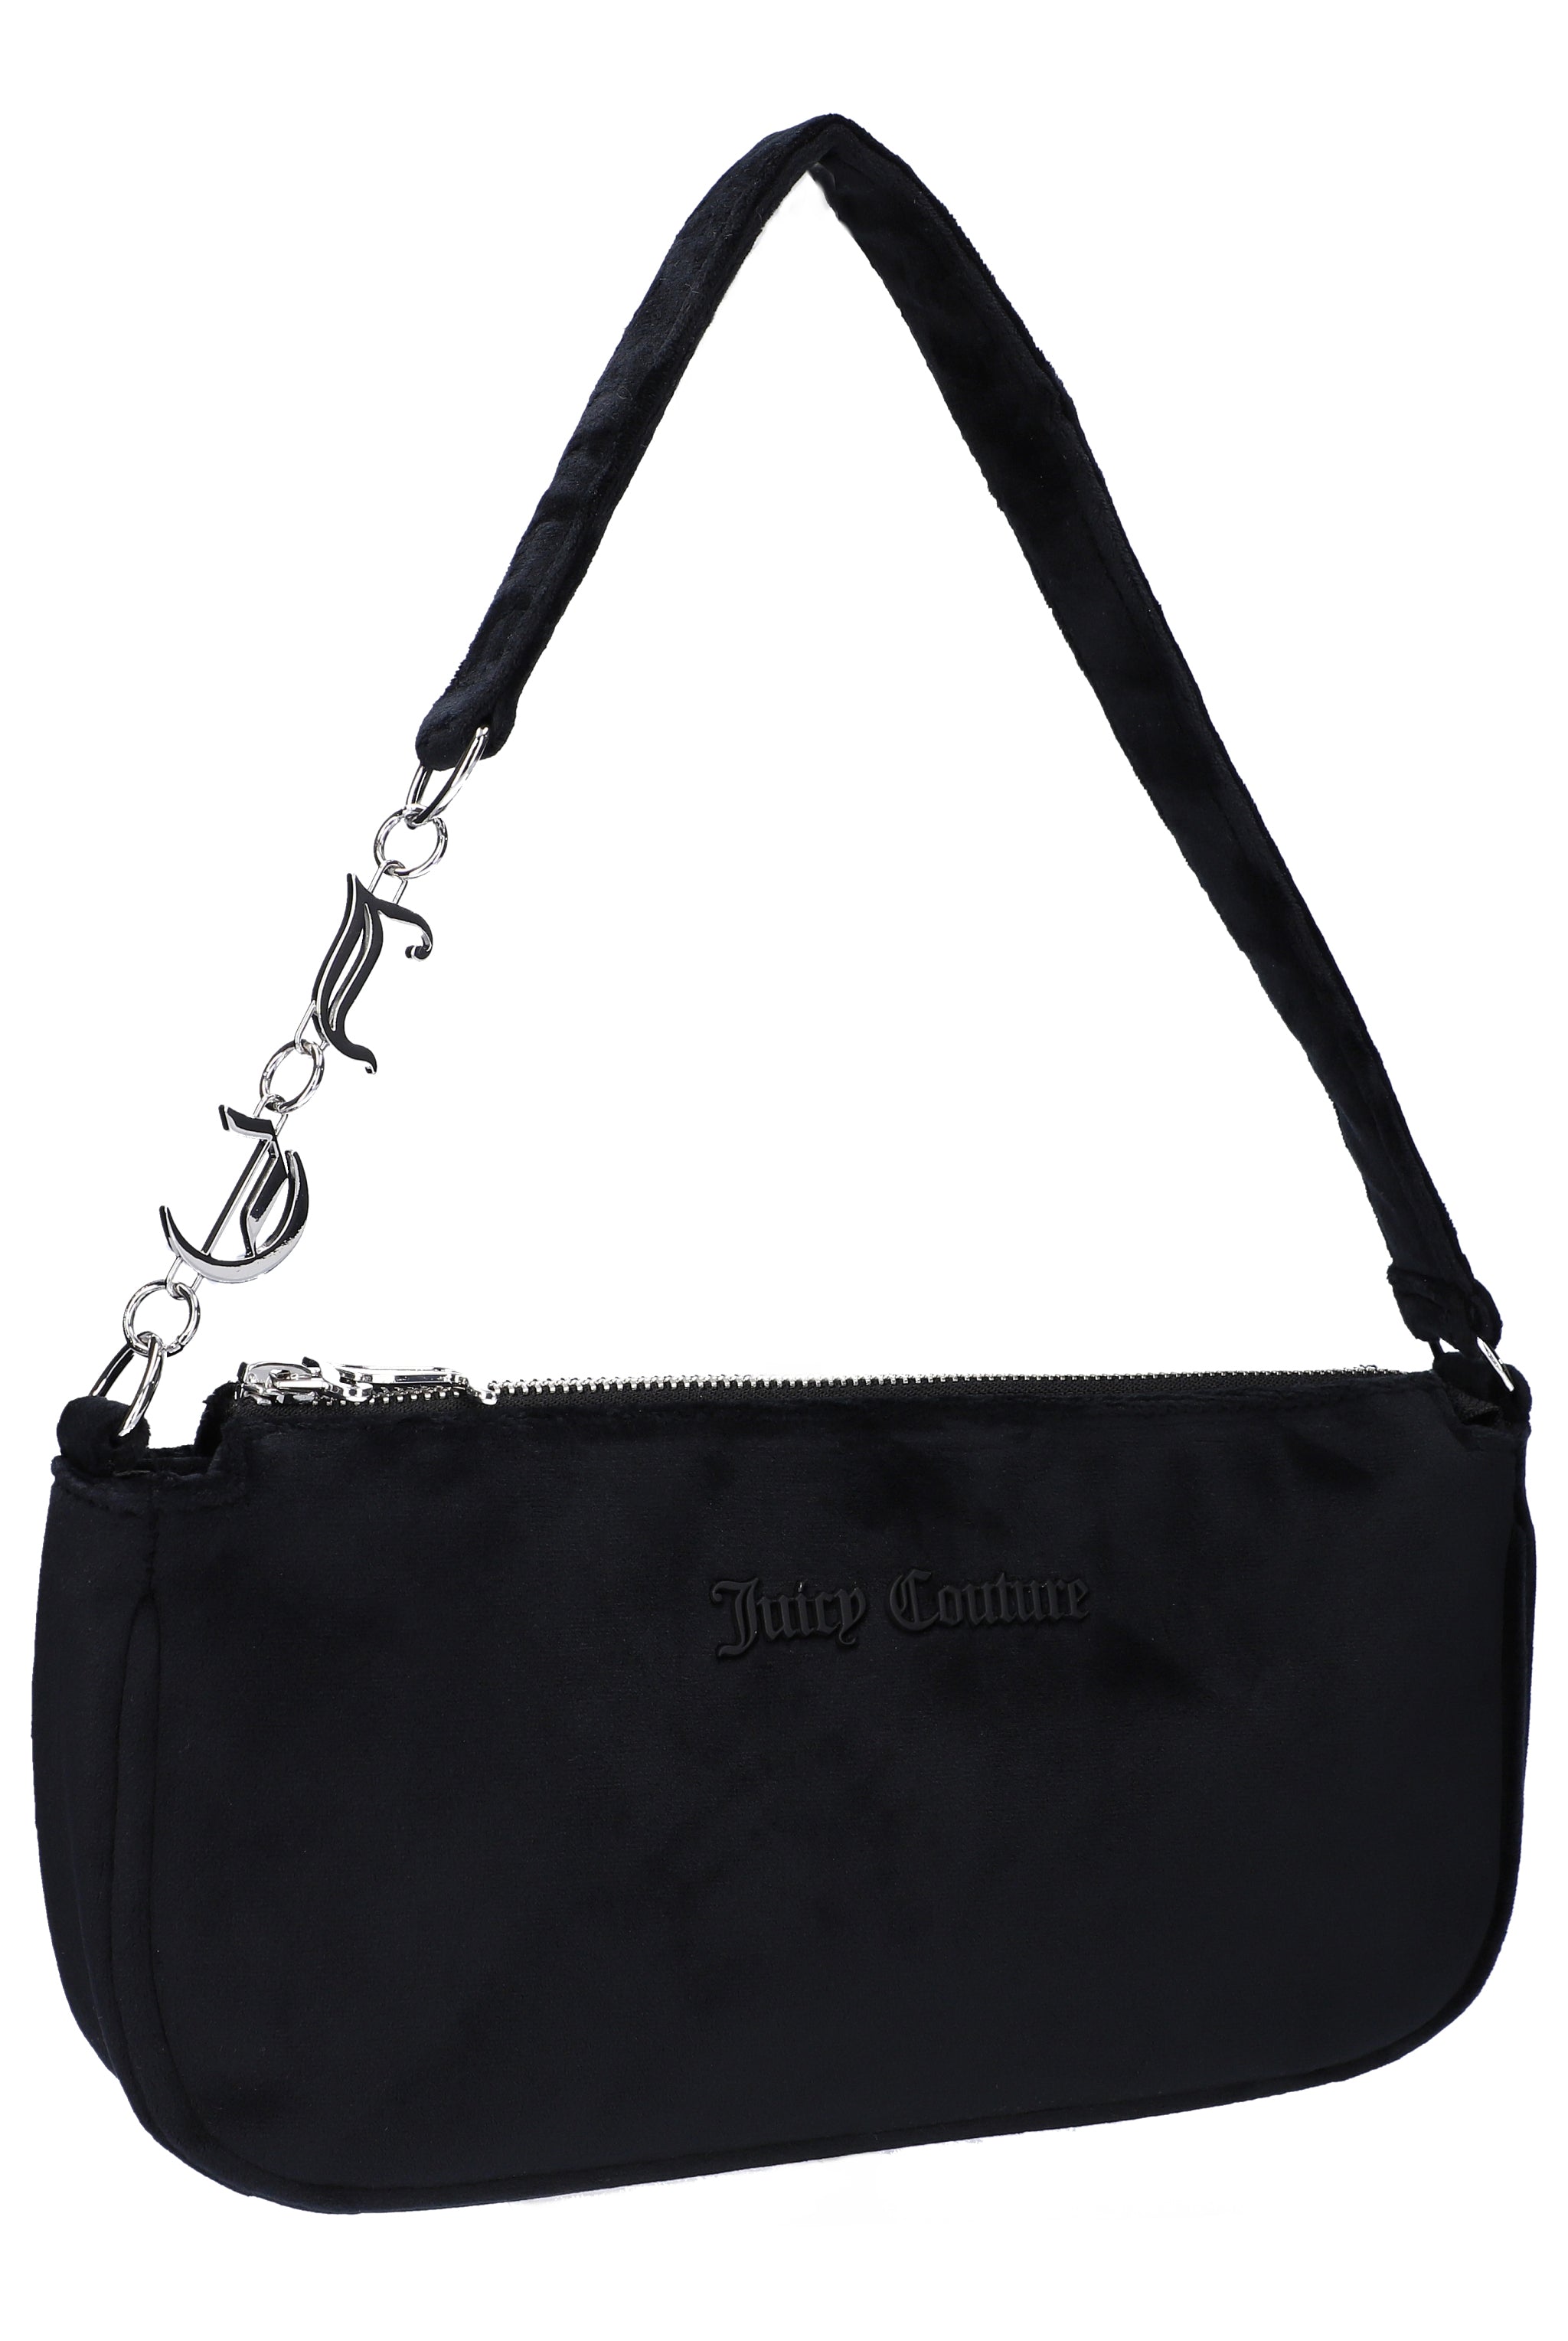 Chic and Stylish Juicy Couture Pink Bag